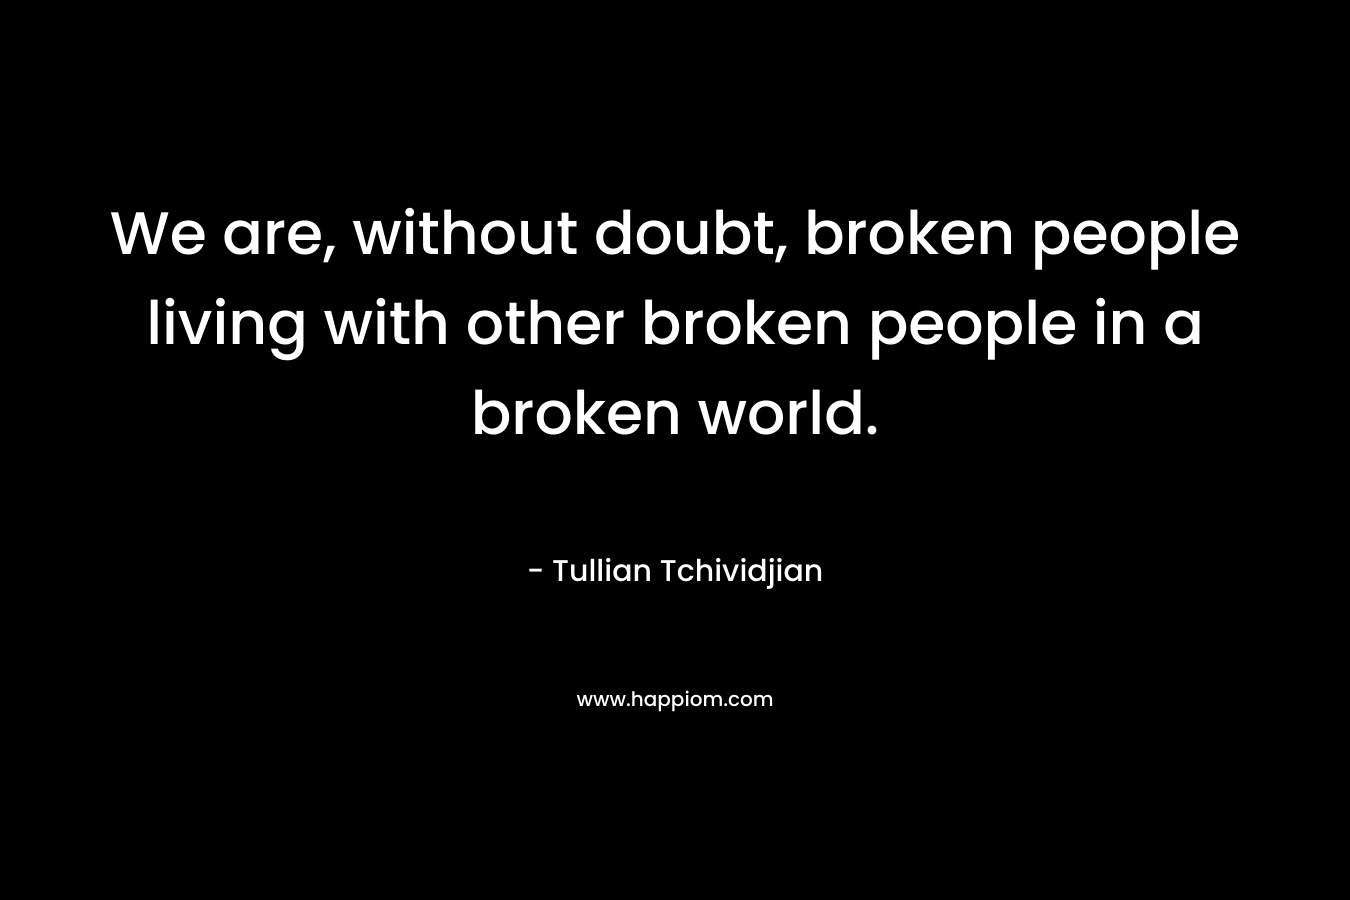 We are, without doubt, broken people living with other broken people in a broken world.